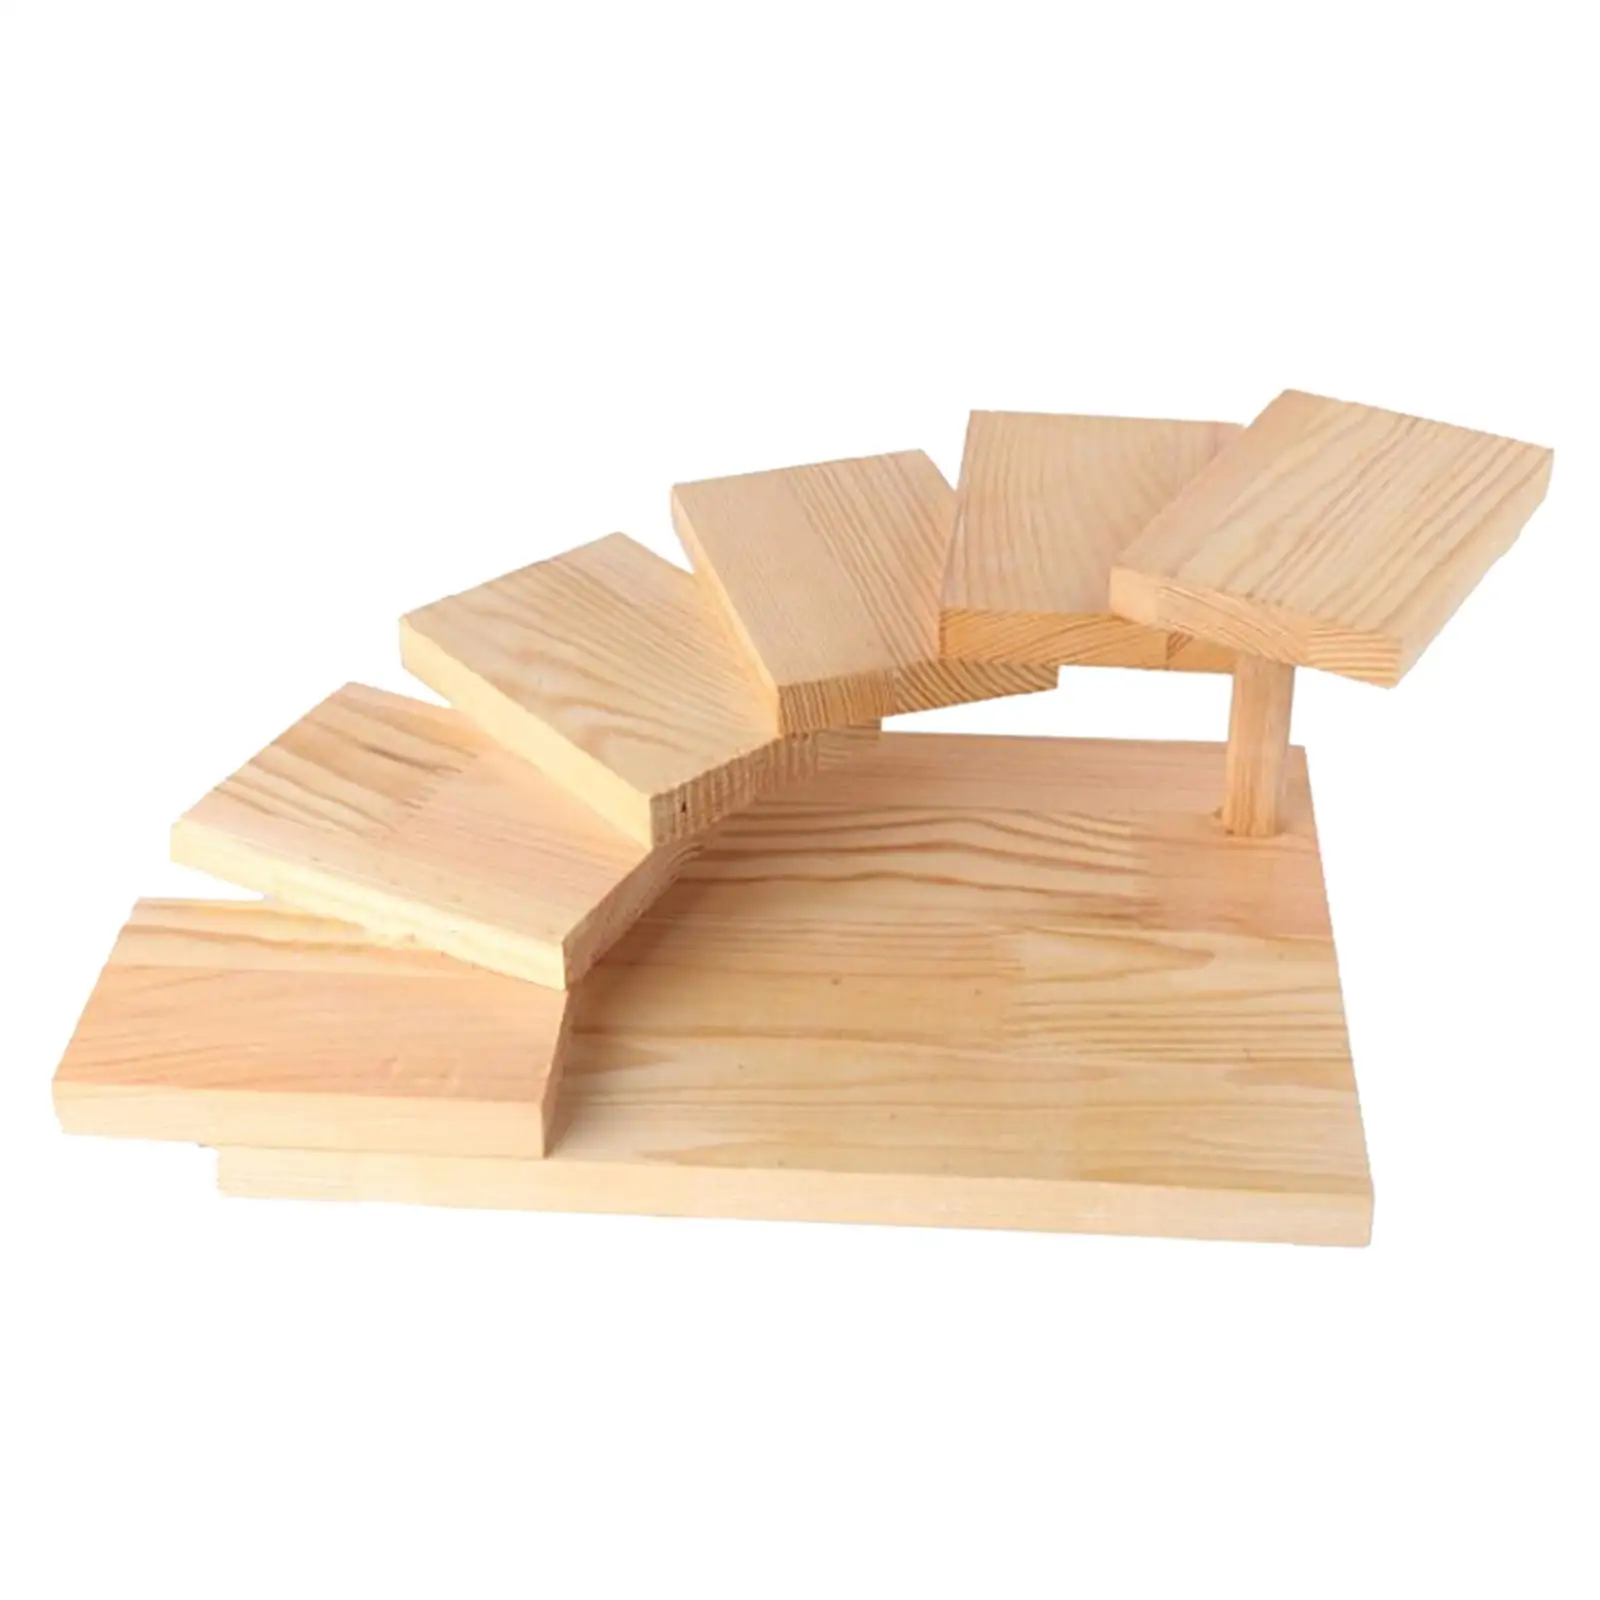 Wood Sushi Serving Tray Multifunction Succulent Holder Display Holder Durable Serving Platters Sushi Plate Sashimi Tray for Home